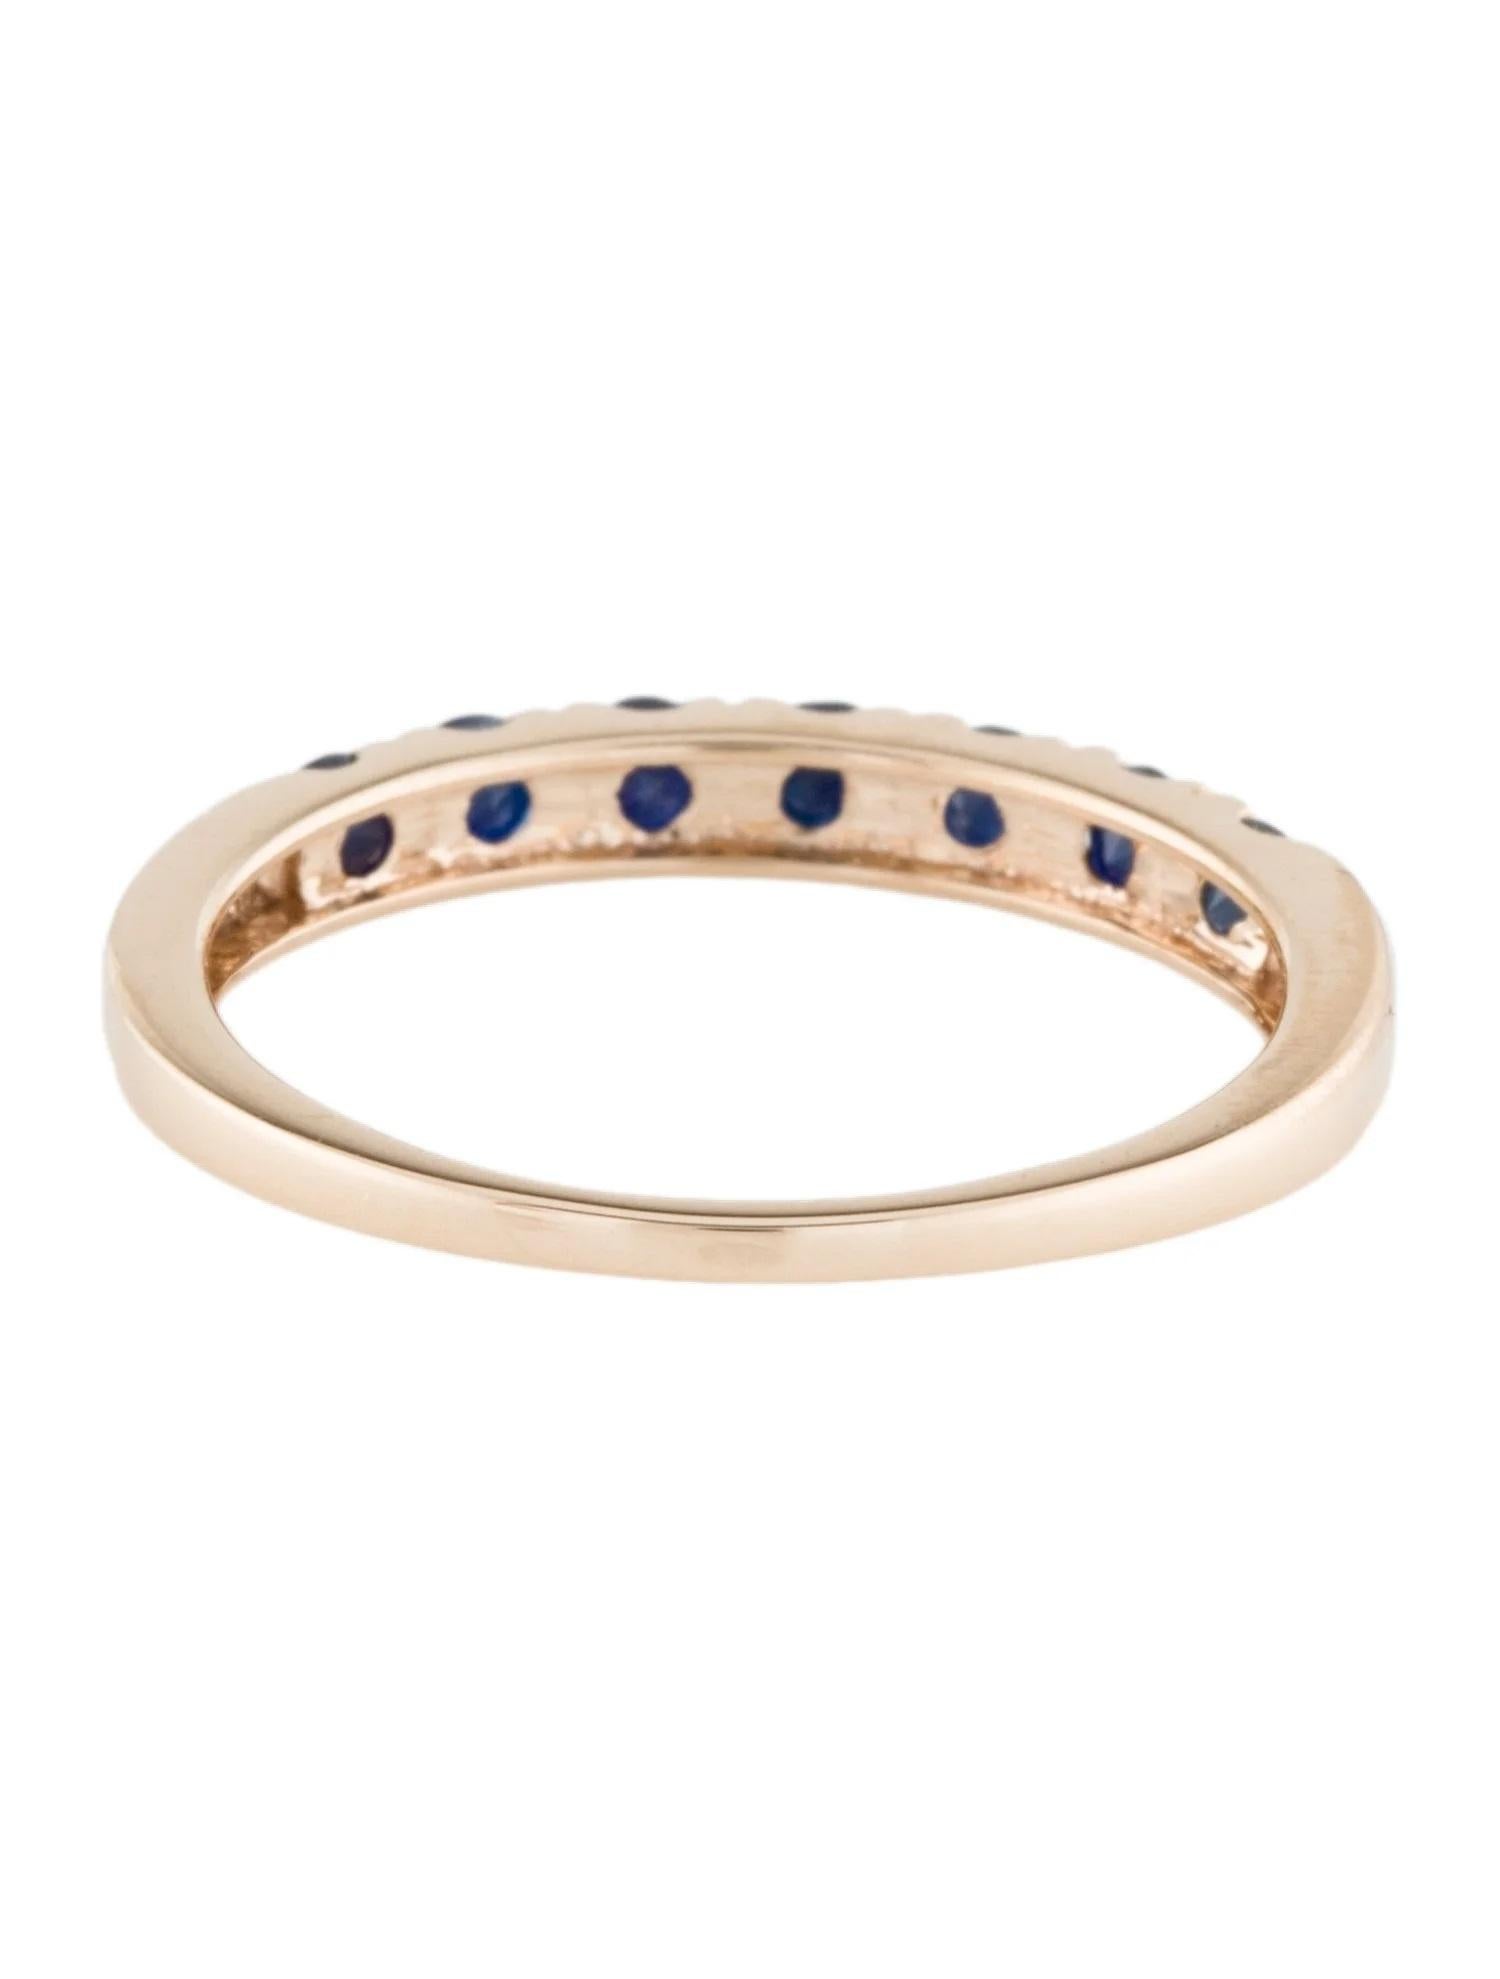 Round Cut 14K Sapphire Band  0.47 Carat Round Faceted Sapphire  Size 6.75  Yellow Gold For Sale